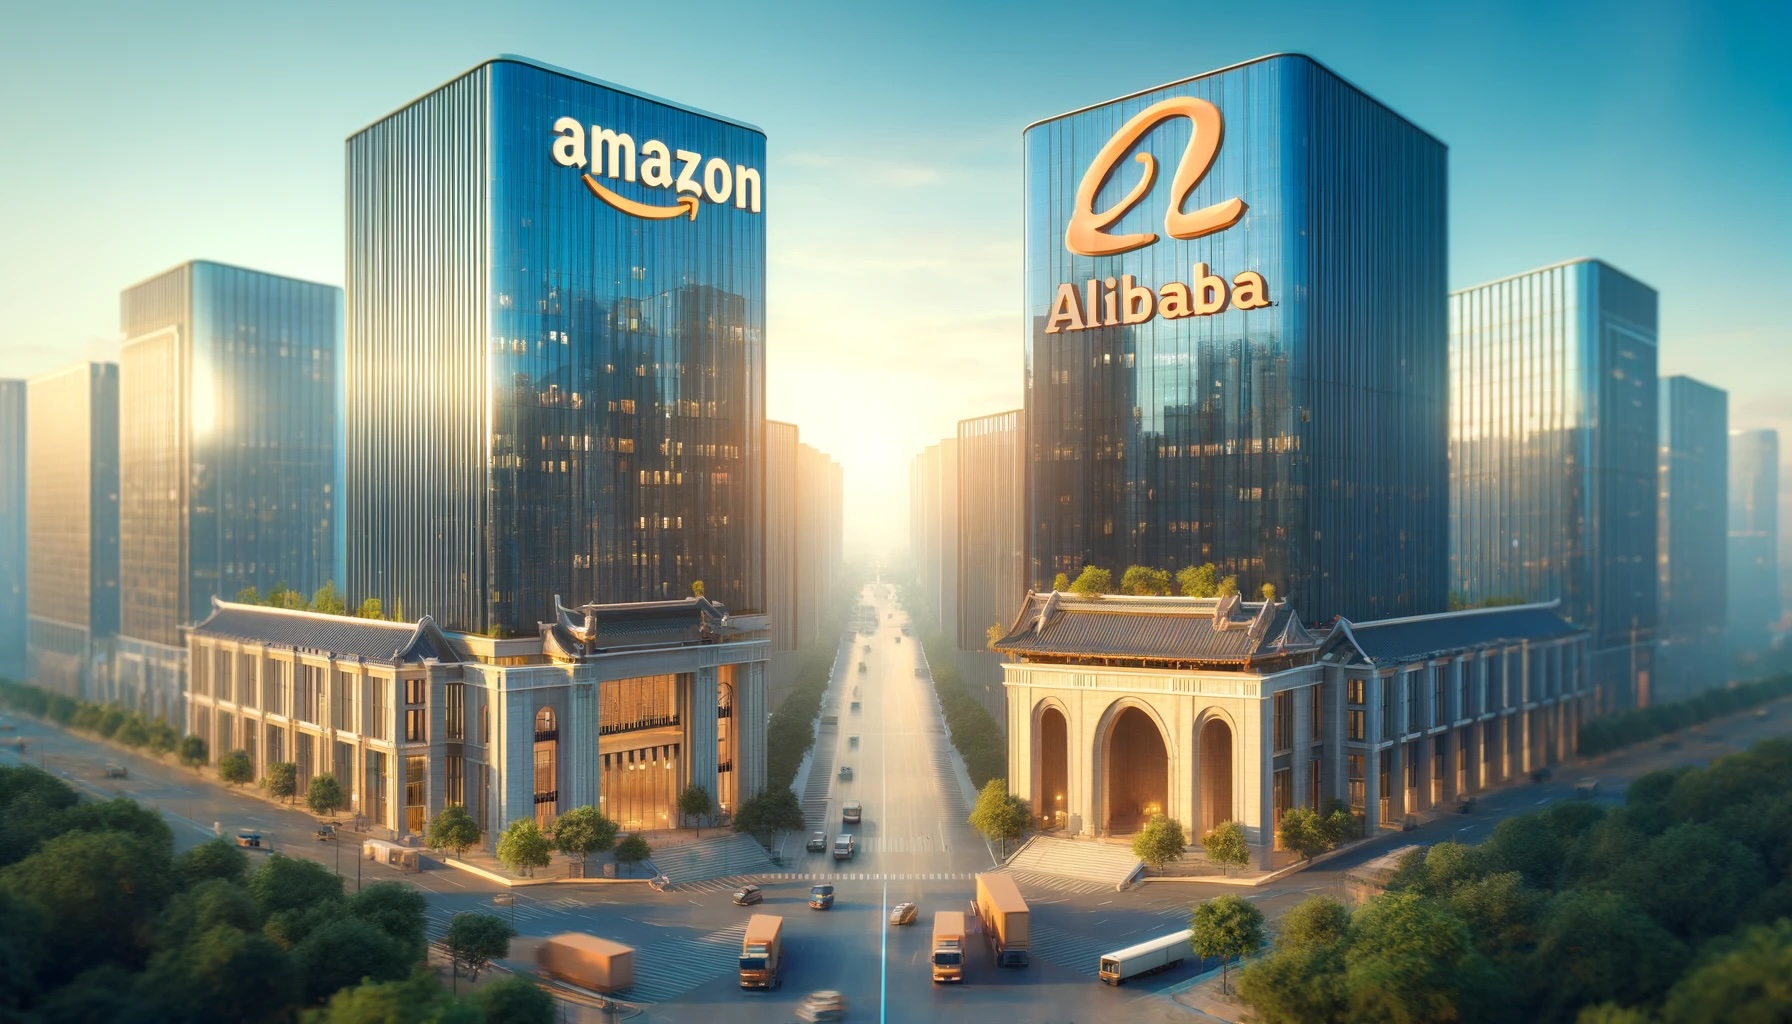 A graphic image of a large downtown with two big buildings. One of them with an Amazon logo, and one with an Alibaba logo.